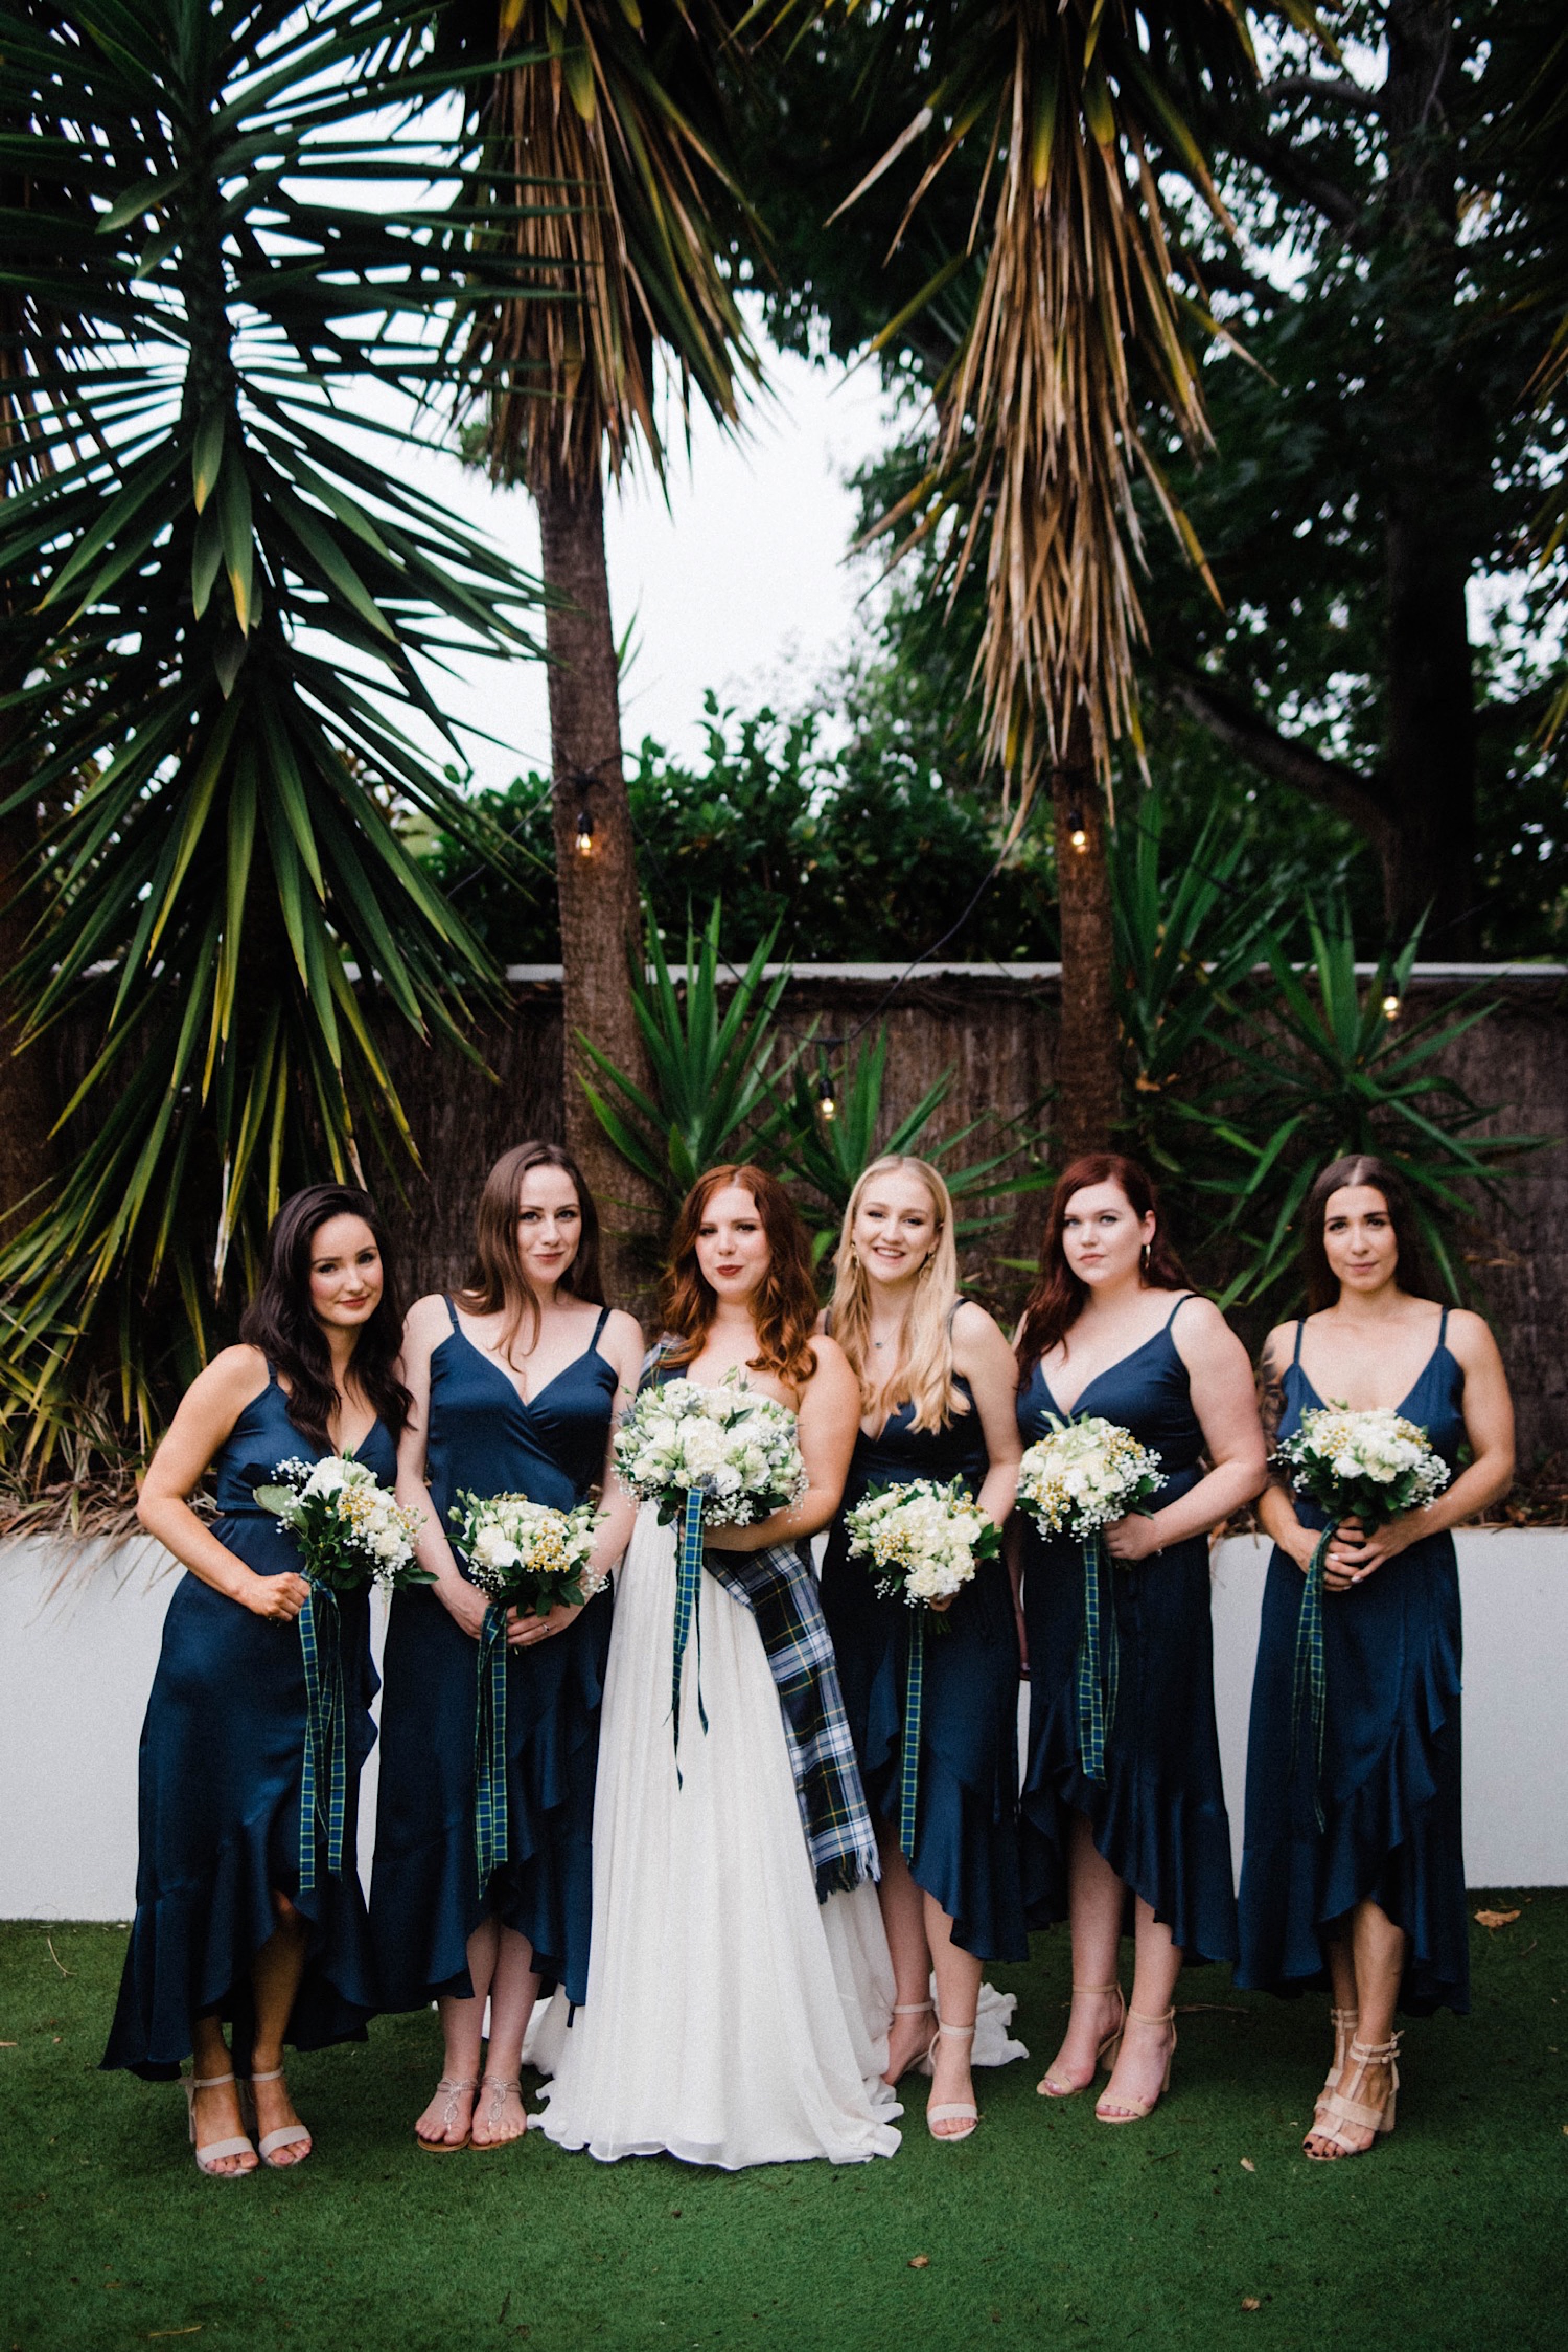 A portrait of the bride with her bridesmaid's at a Sustainable Backyard Wedding in front of a white wall and tall trees.